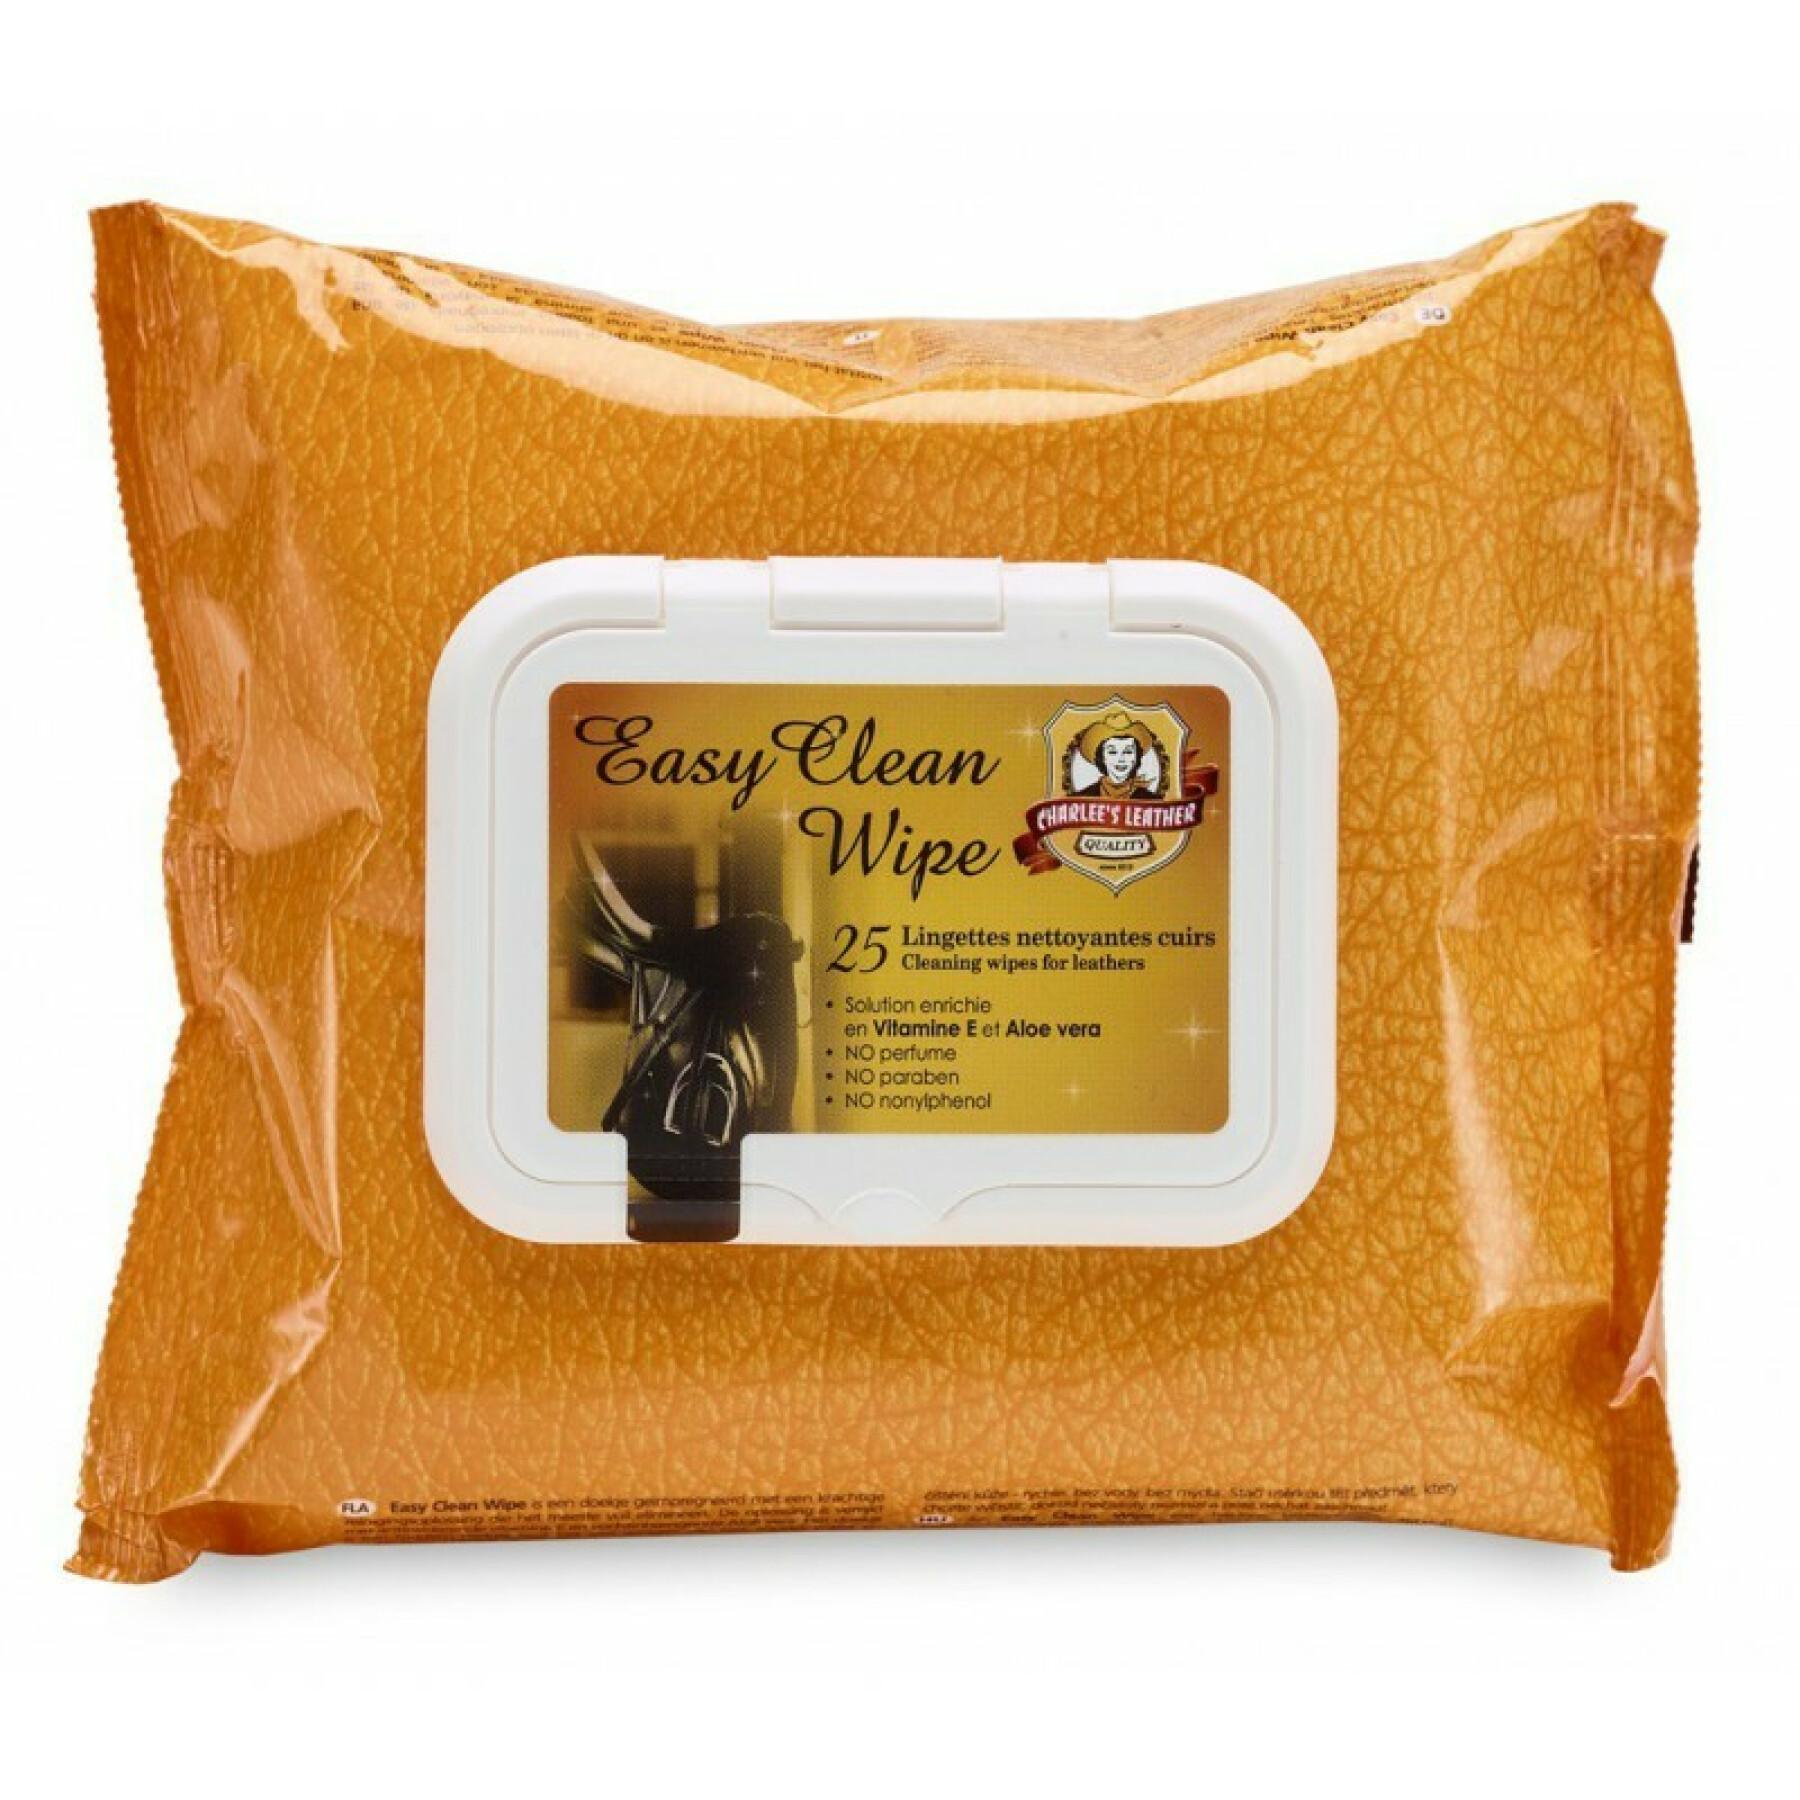 Leather Wipes 25 Wipes